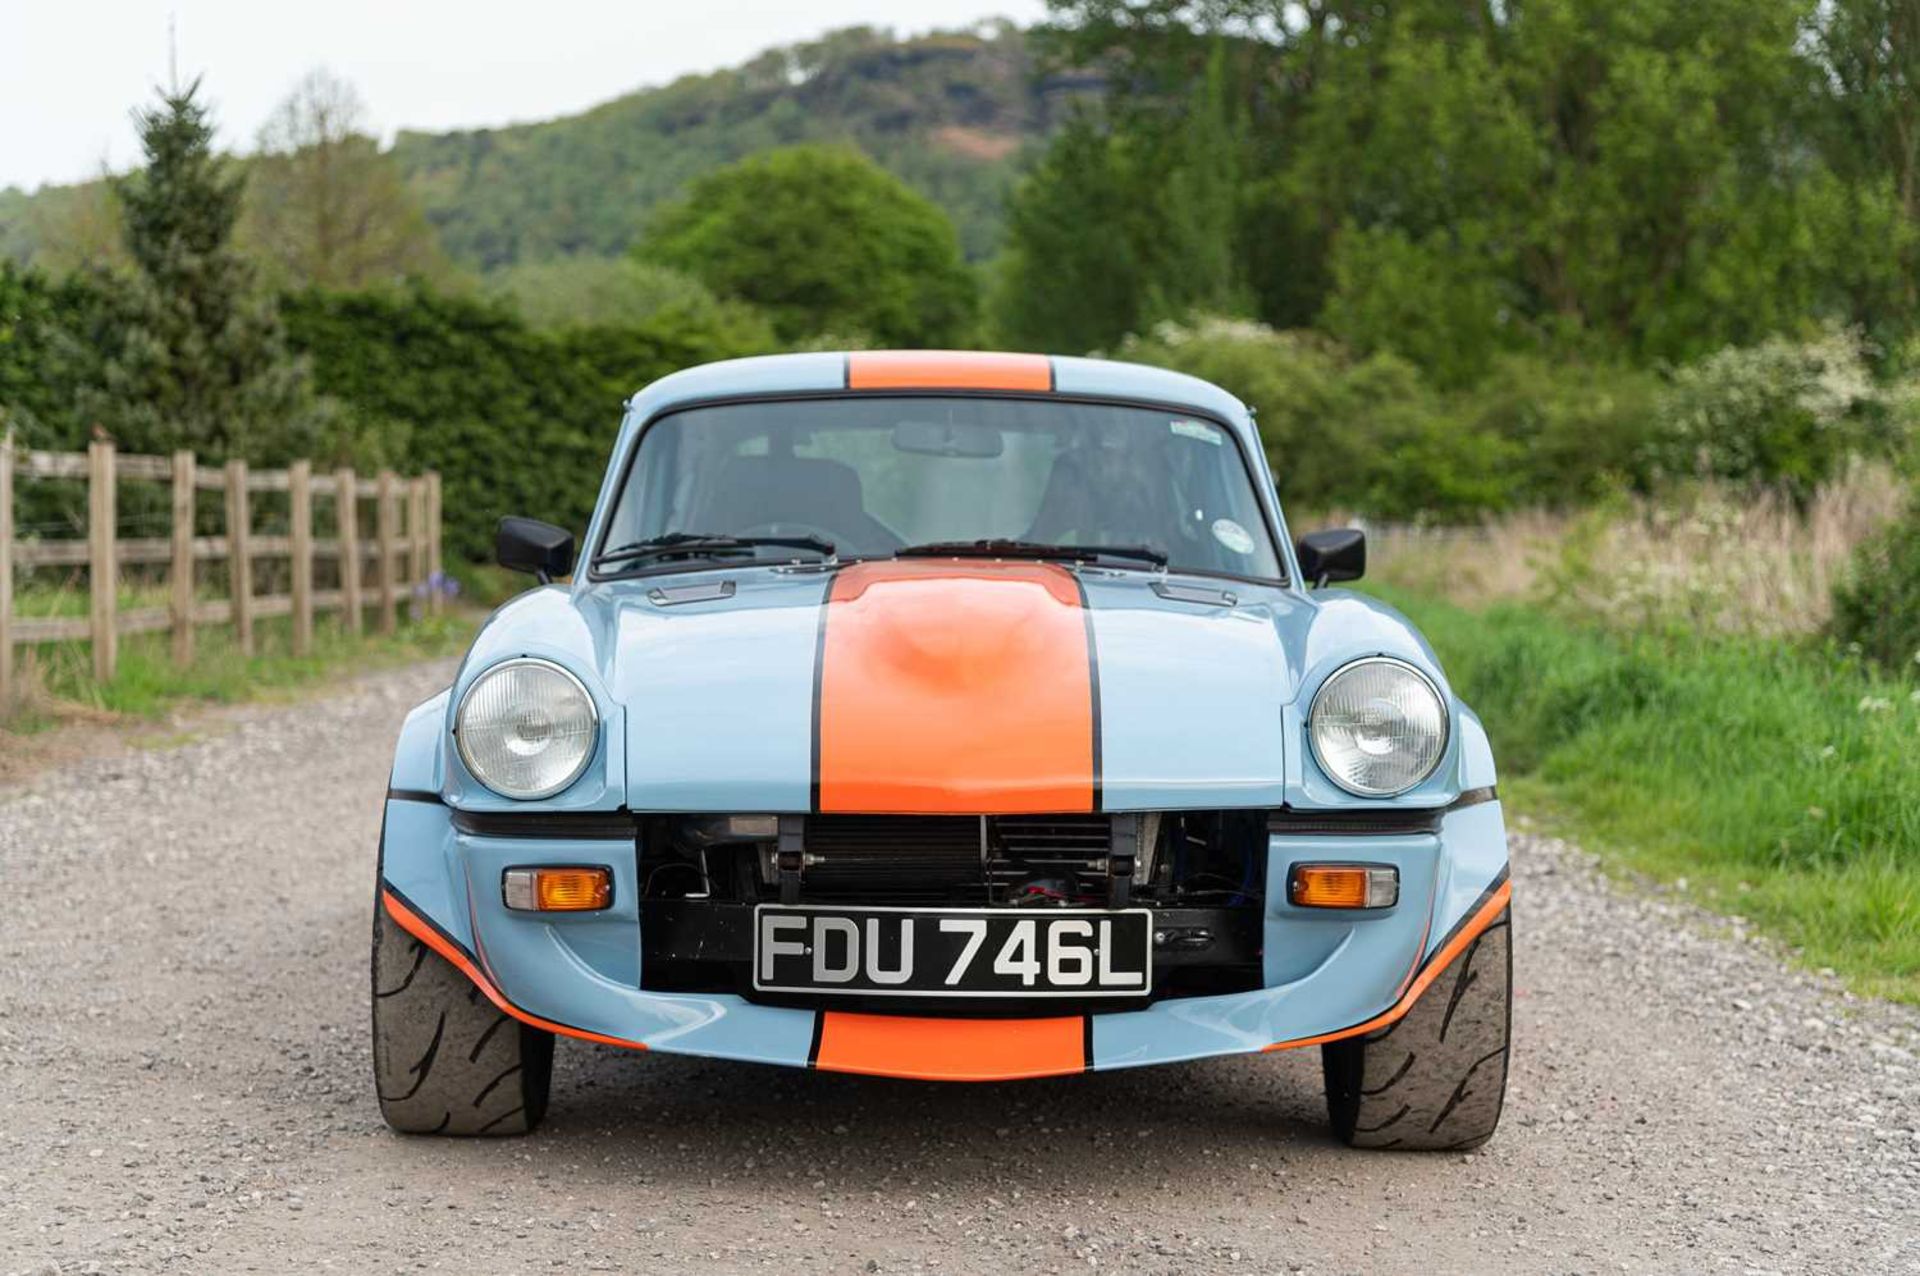 1973 Triumph GT6  ***NO RESERVE*** Presented in Gulf Racing-inspired paintwork, road-going track wea - Bild 4 aus 65